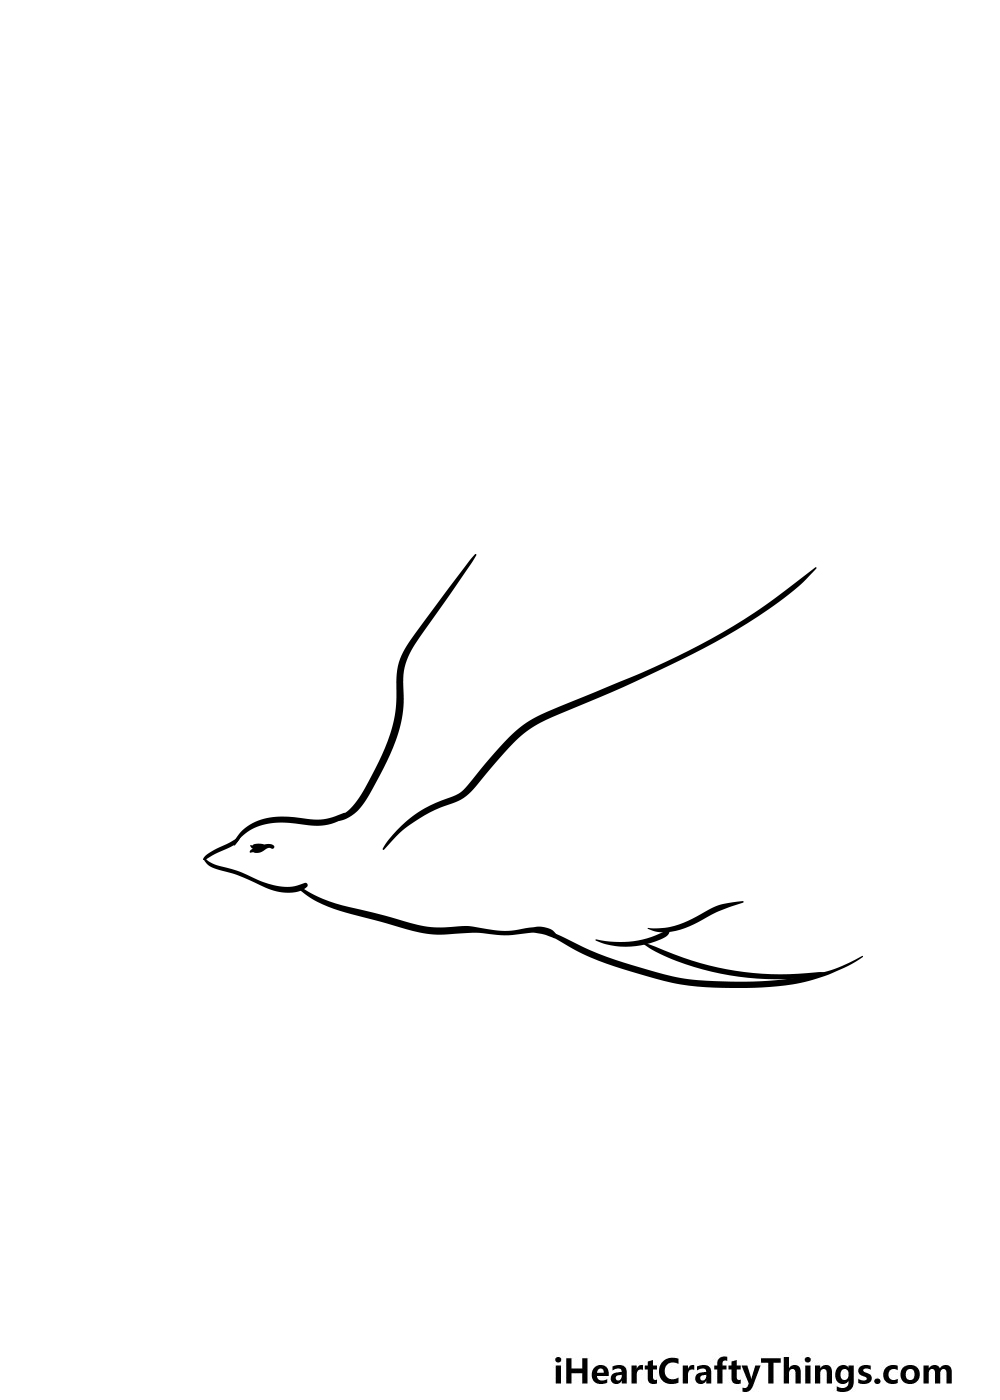 drawing a flying bird step 2